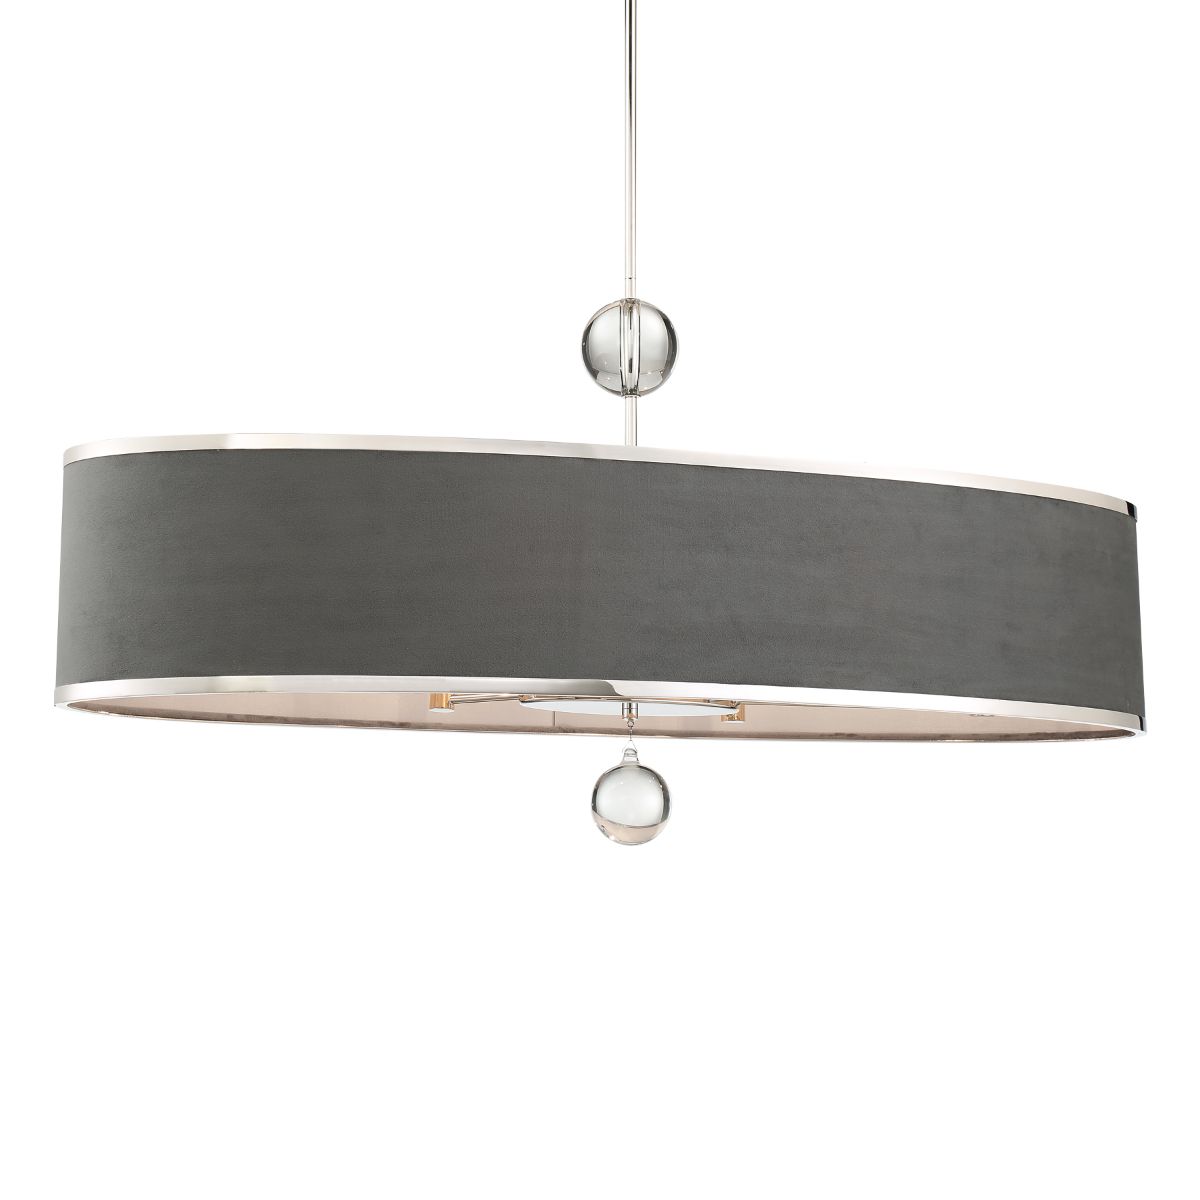 Luxour 44 in. 6 Lights Pendant Light Polished Nickel Finish